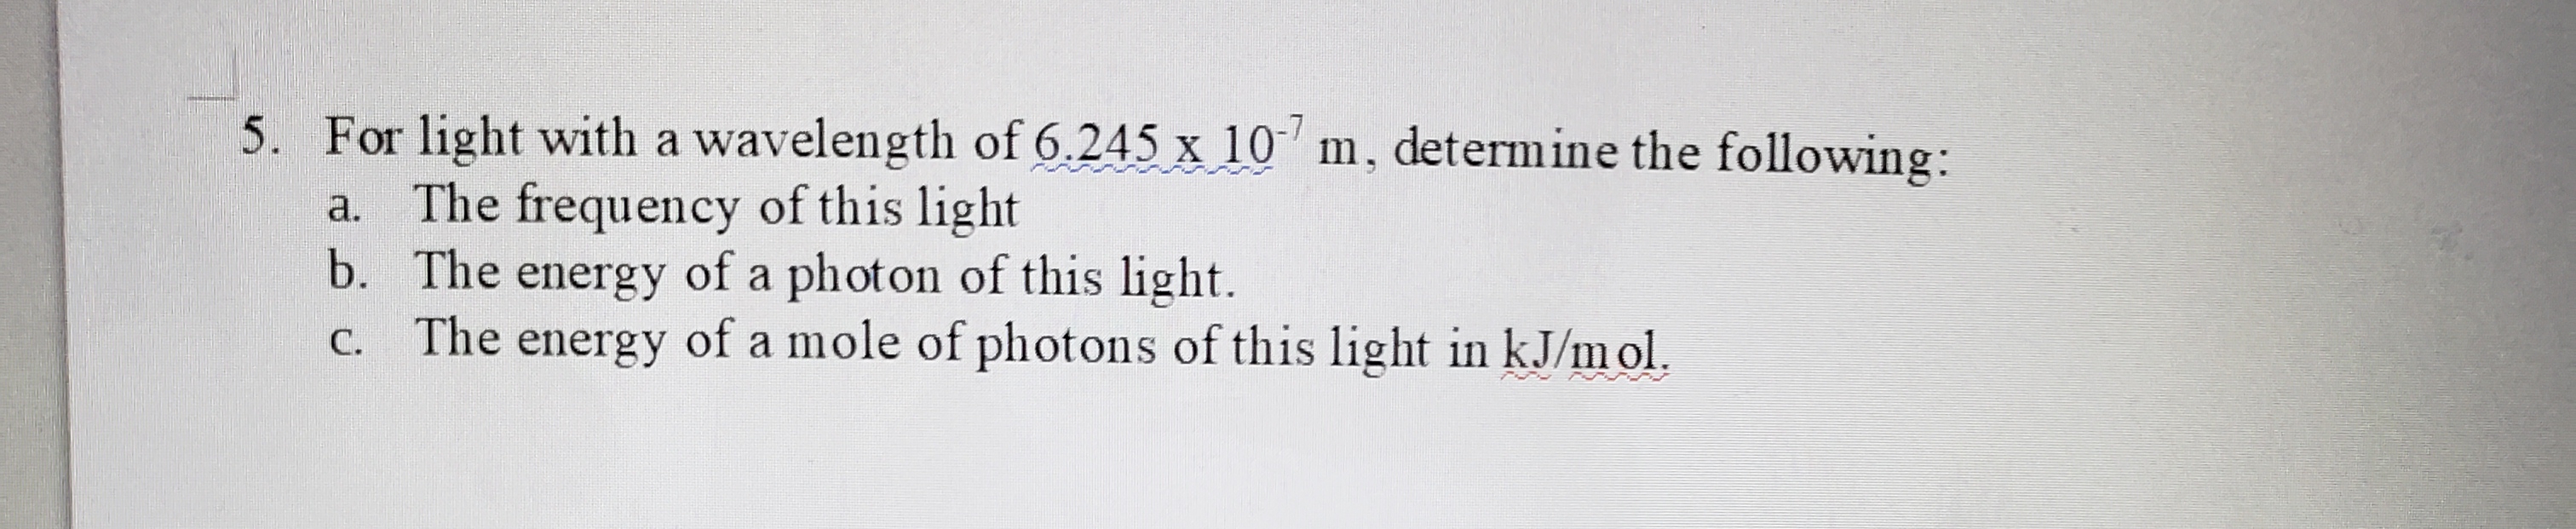 5. For light with a wavelength of 6.245 x 10 m, determine the following:
a. The frequency of this light
The energy of a mole of photons of this light in kJ/m ol.
C.
